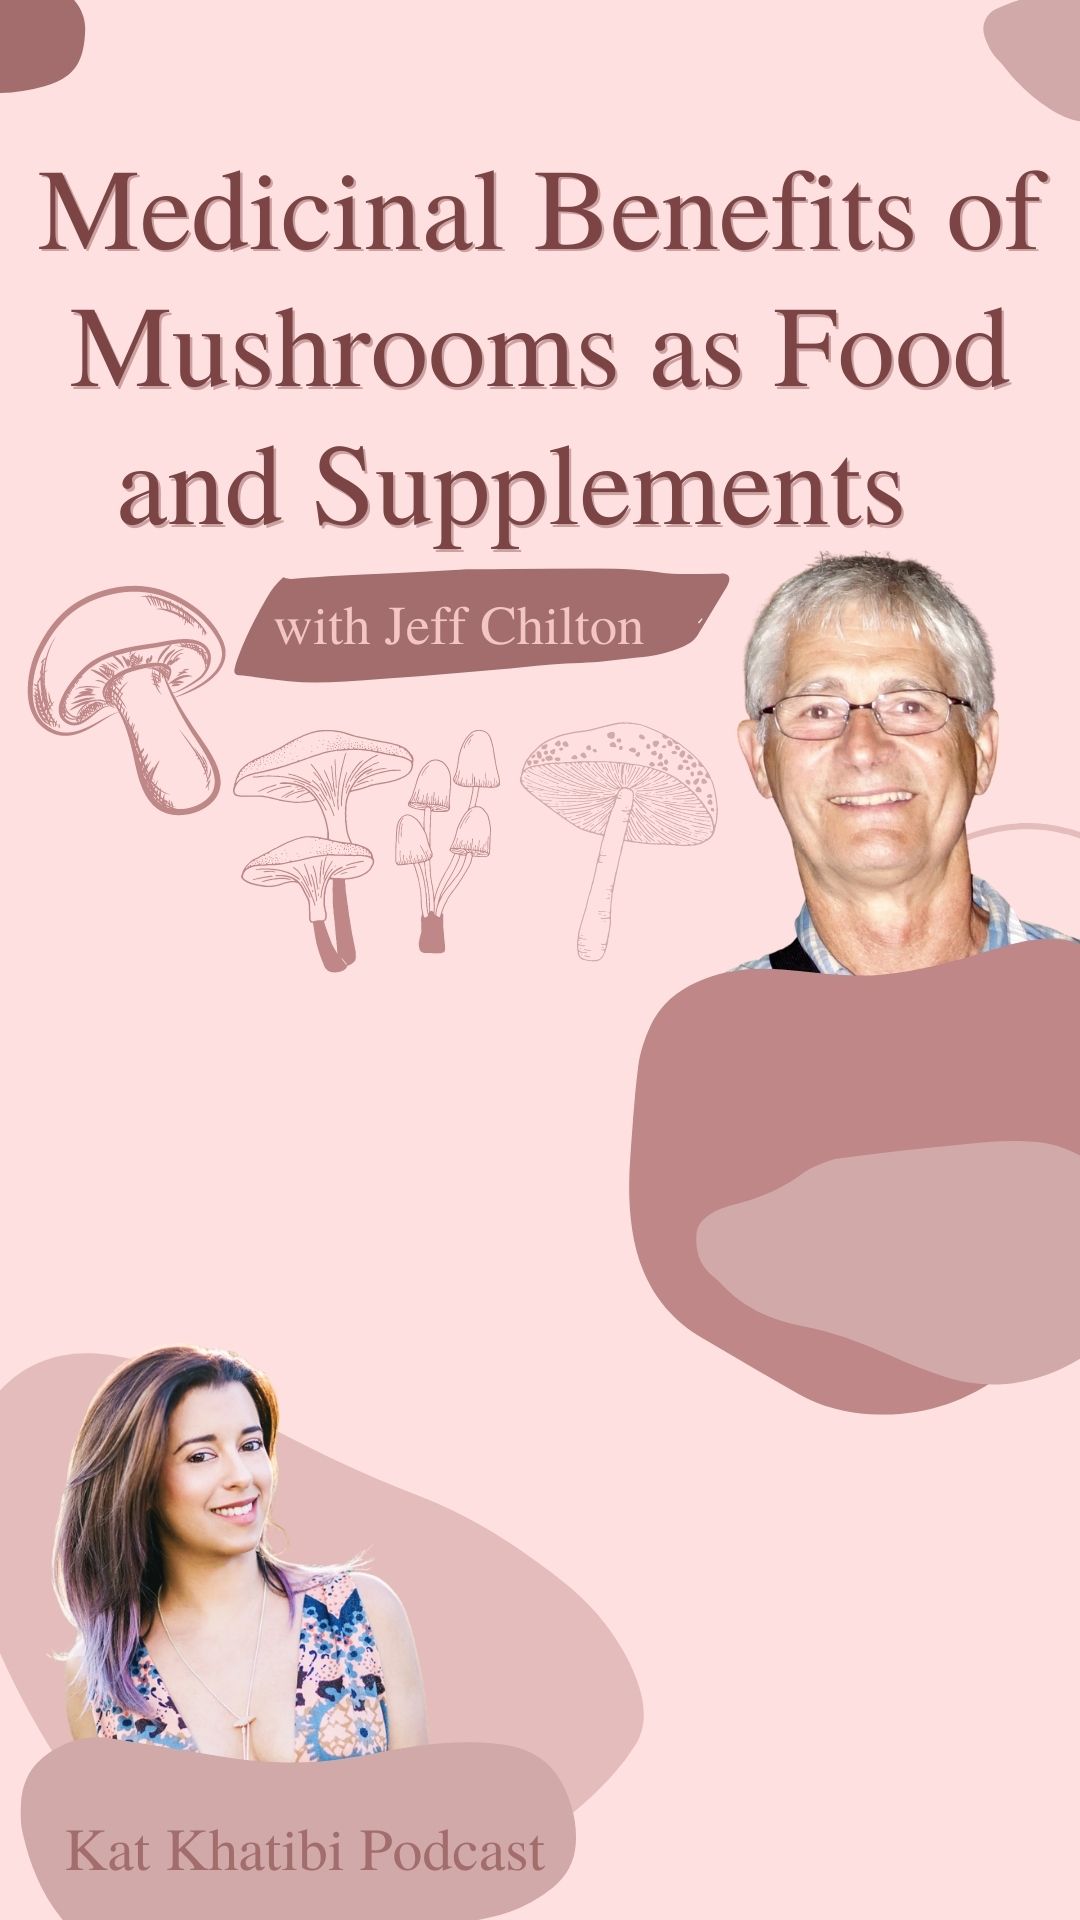 Medicinal Benefits of Mushrooms as Food and Supplements with Jeff Chilton